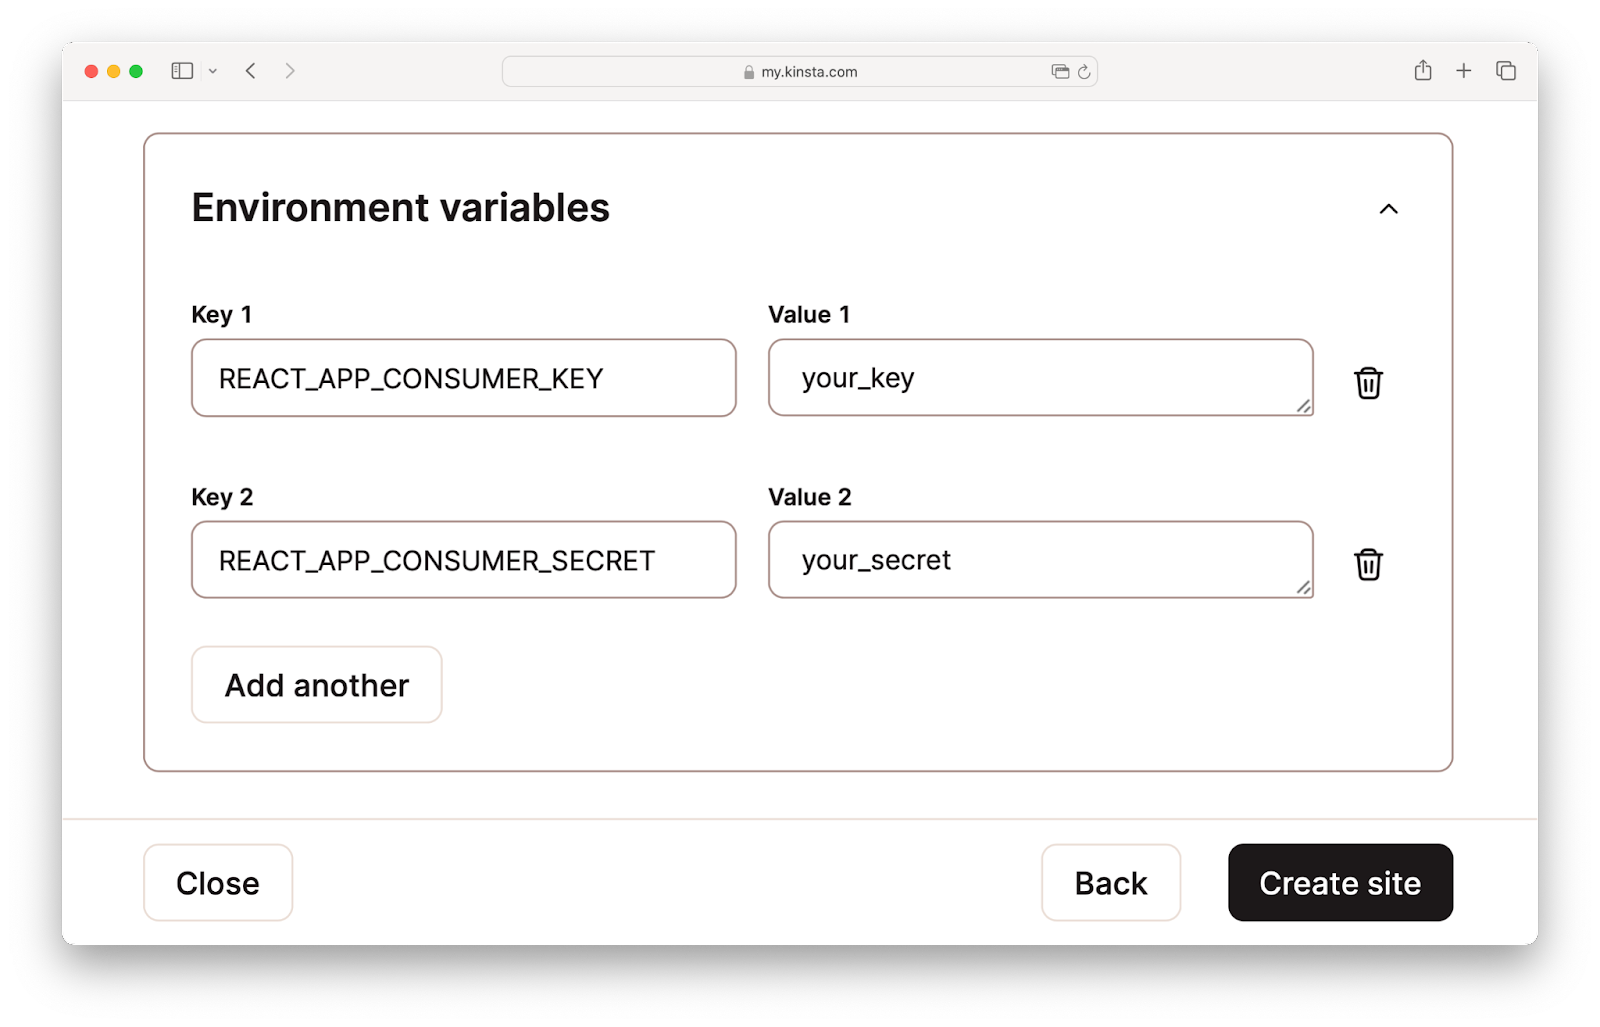 Environment variables page with fields for key and value pairs. There is a Create site button at the bottom on the right